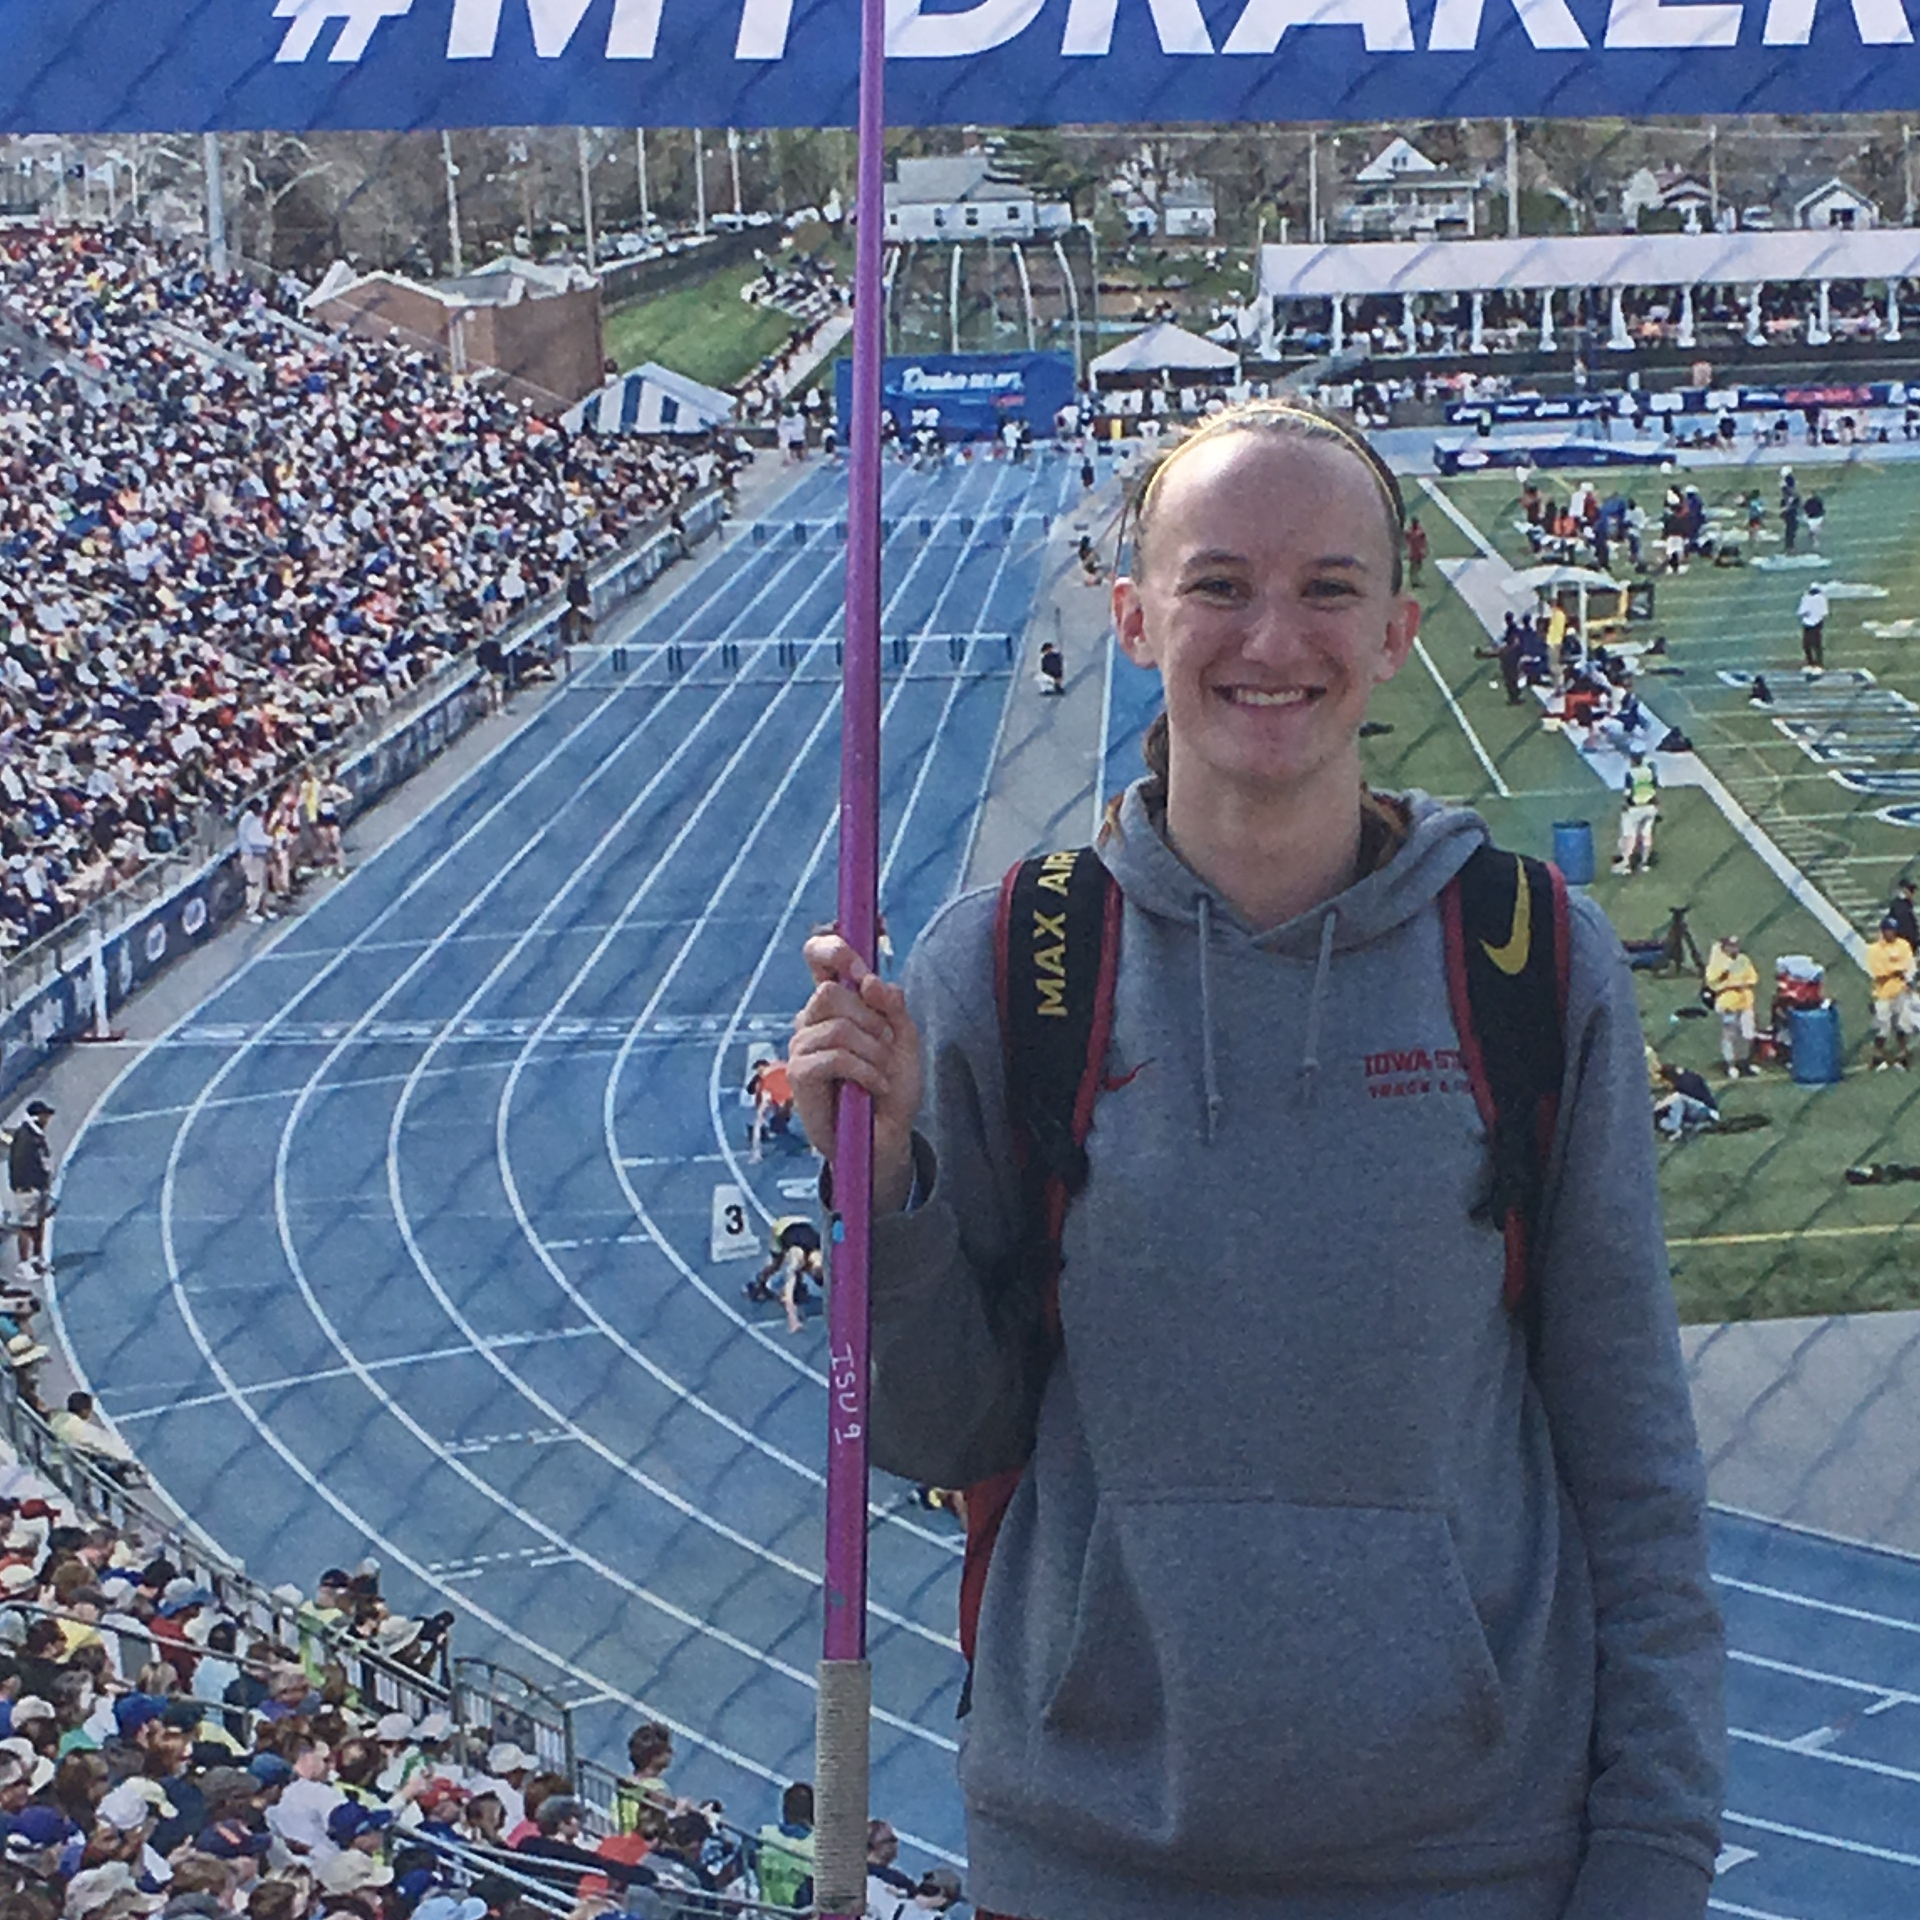 Bailey at the Drake Relays